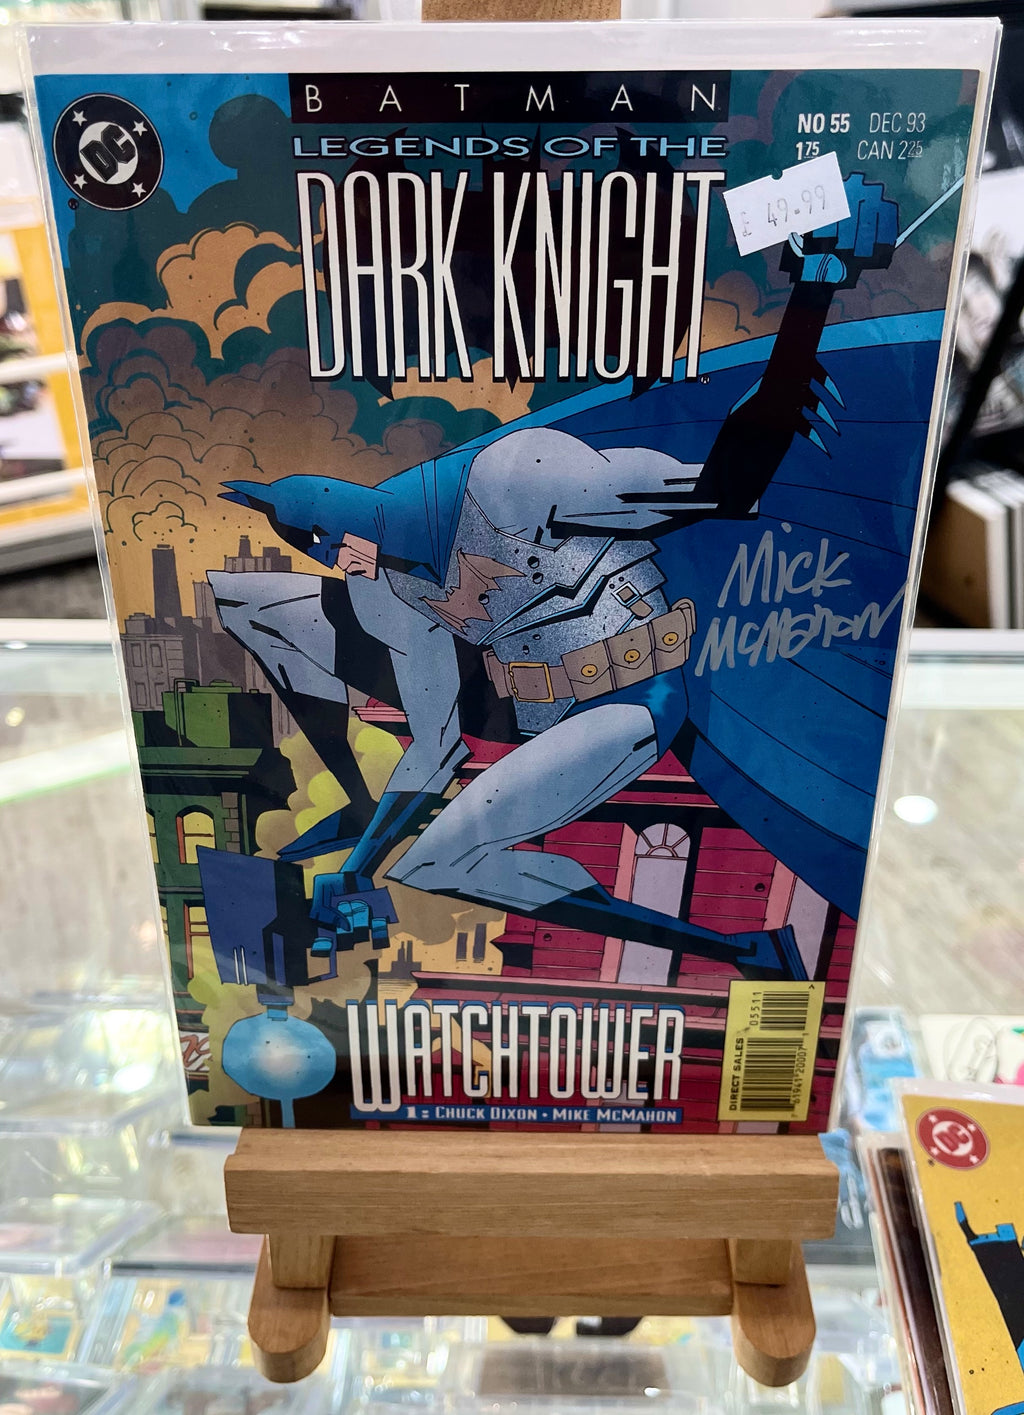 Batman Legends of the Dark Knight Watchtower Mike McMahon Autographed DC Comics with COA